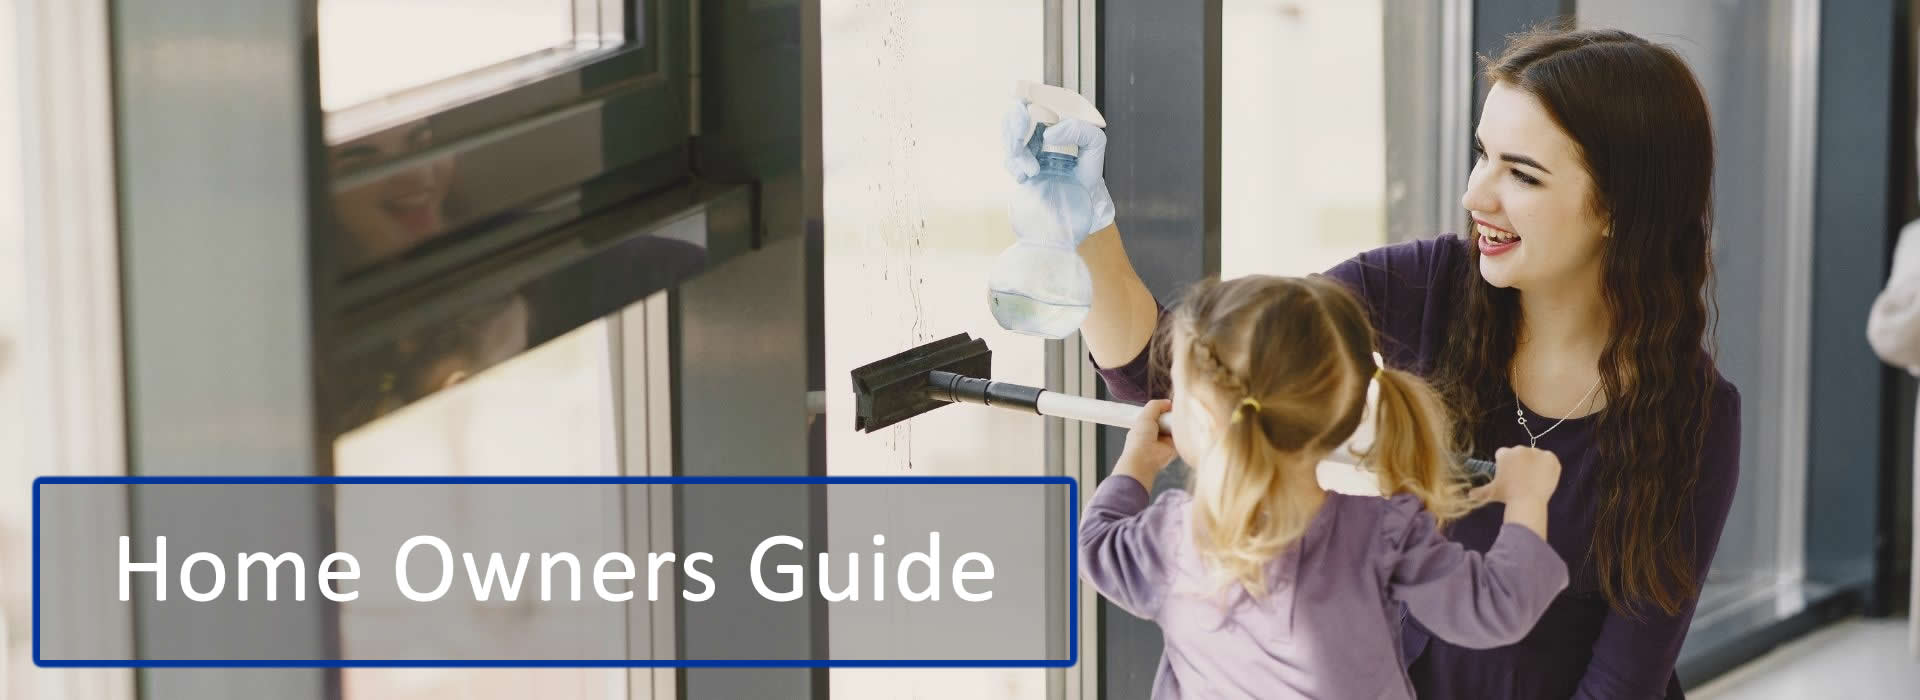 Home Owners guide to windows